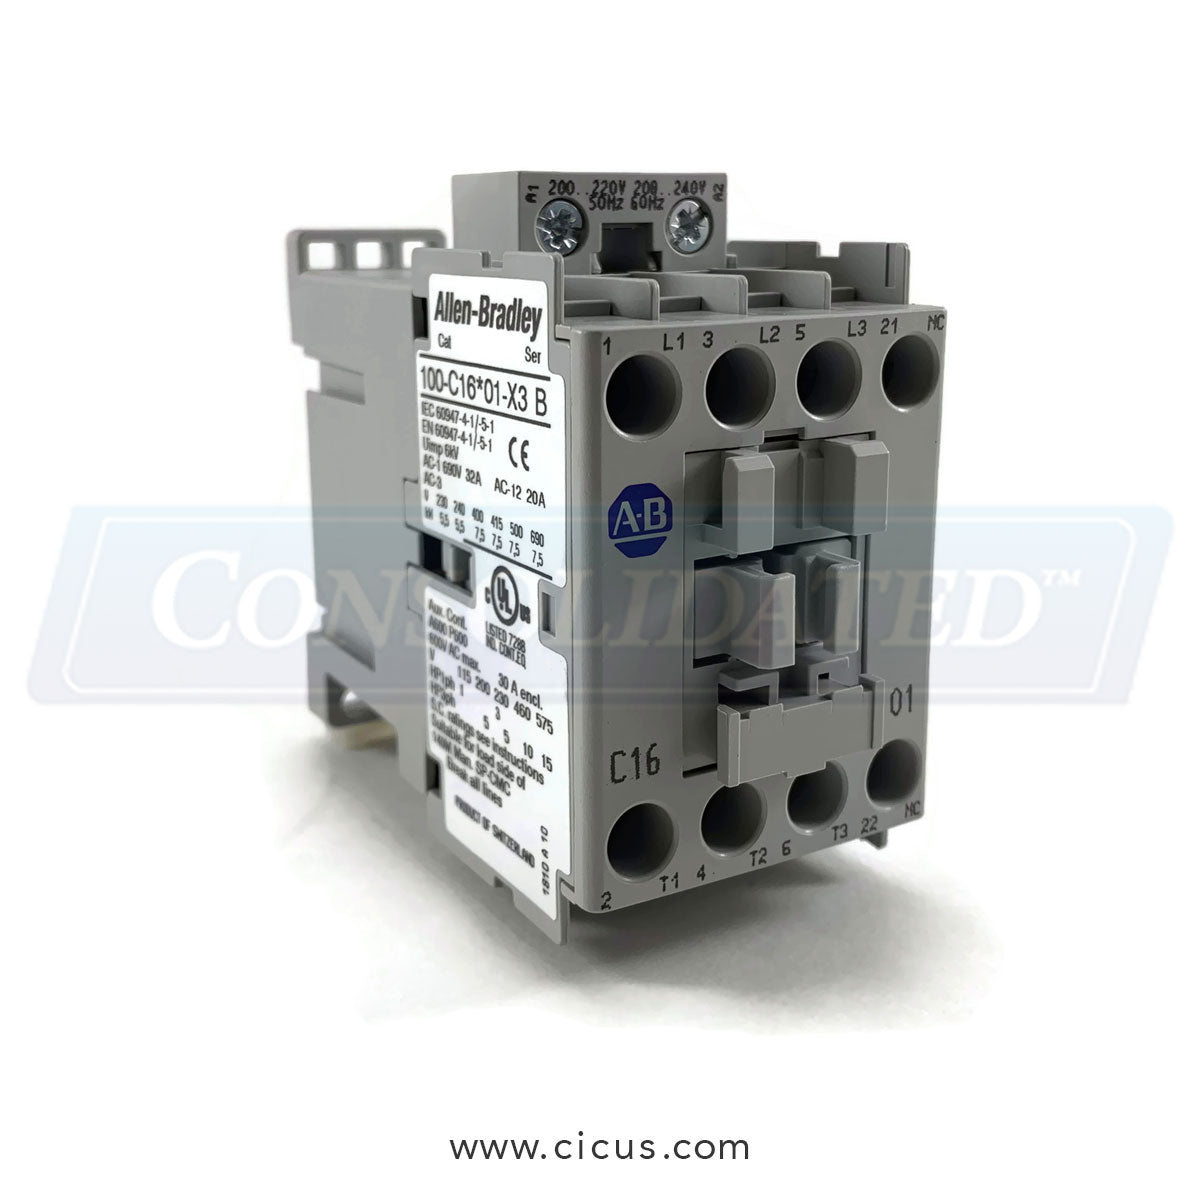 Alliance Laundry Systems Contactor C16 220v [F330177P]